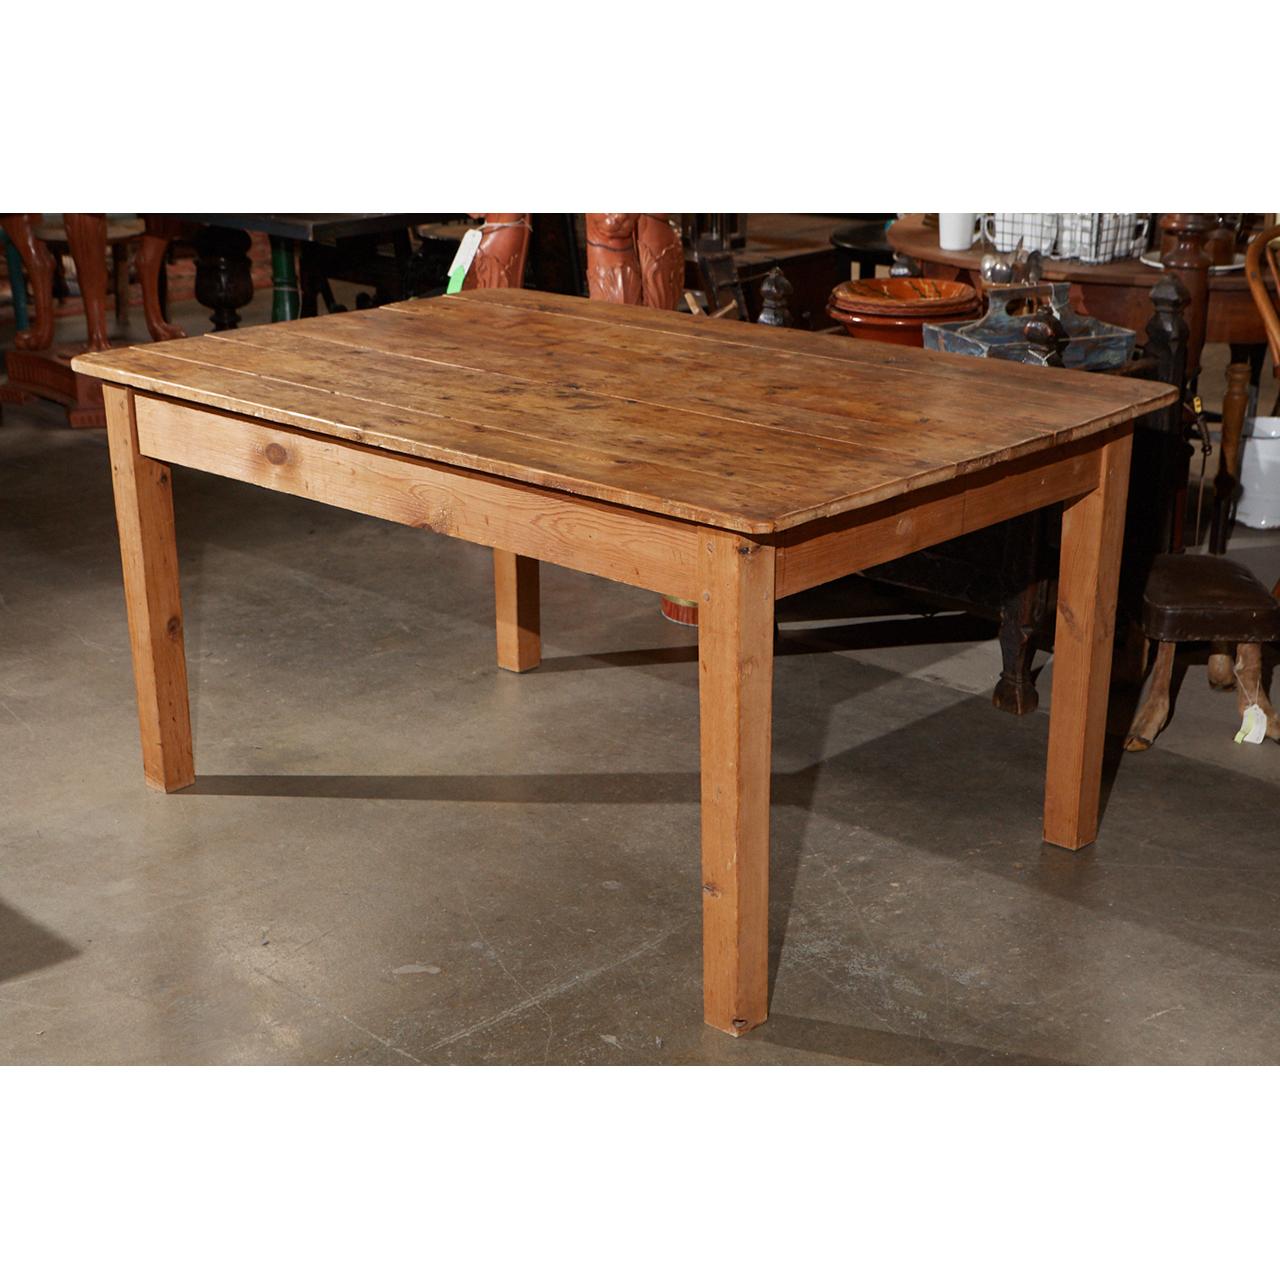 Woodwork Rustic Country Pine Table